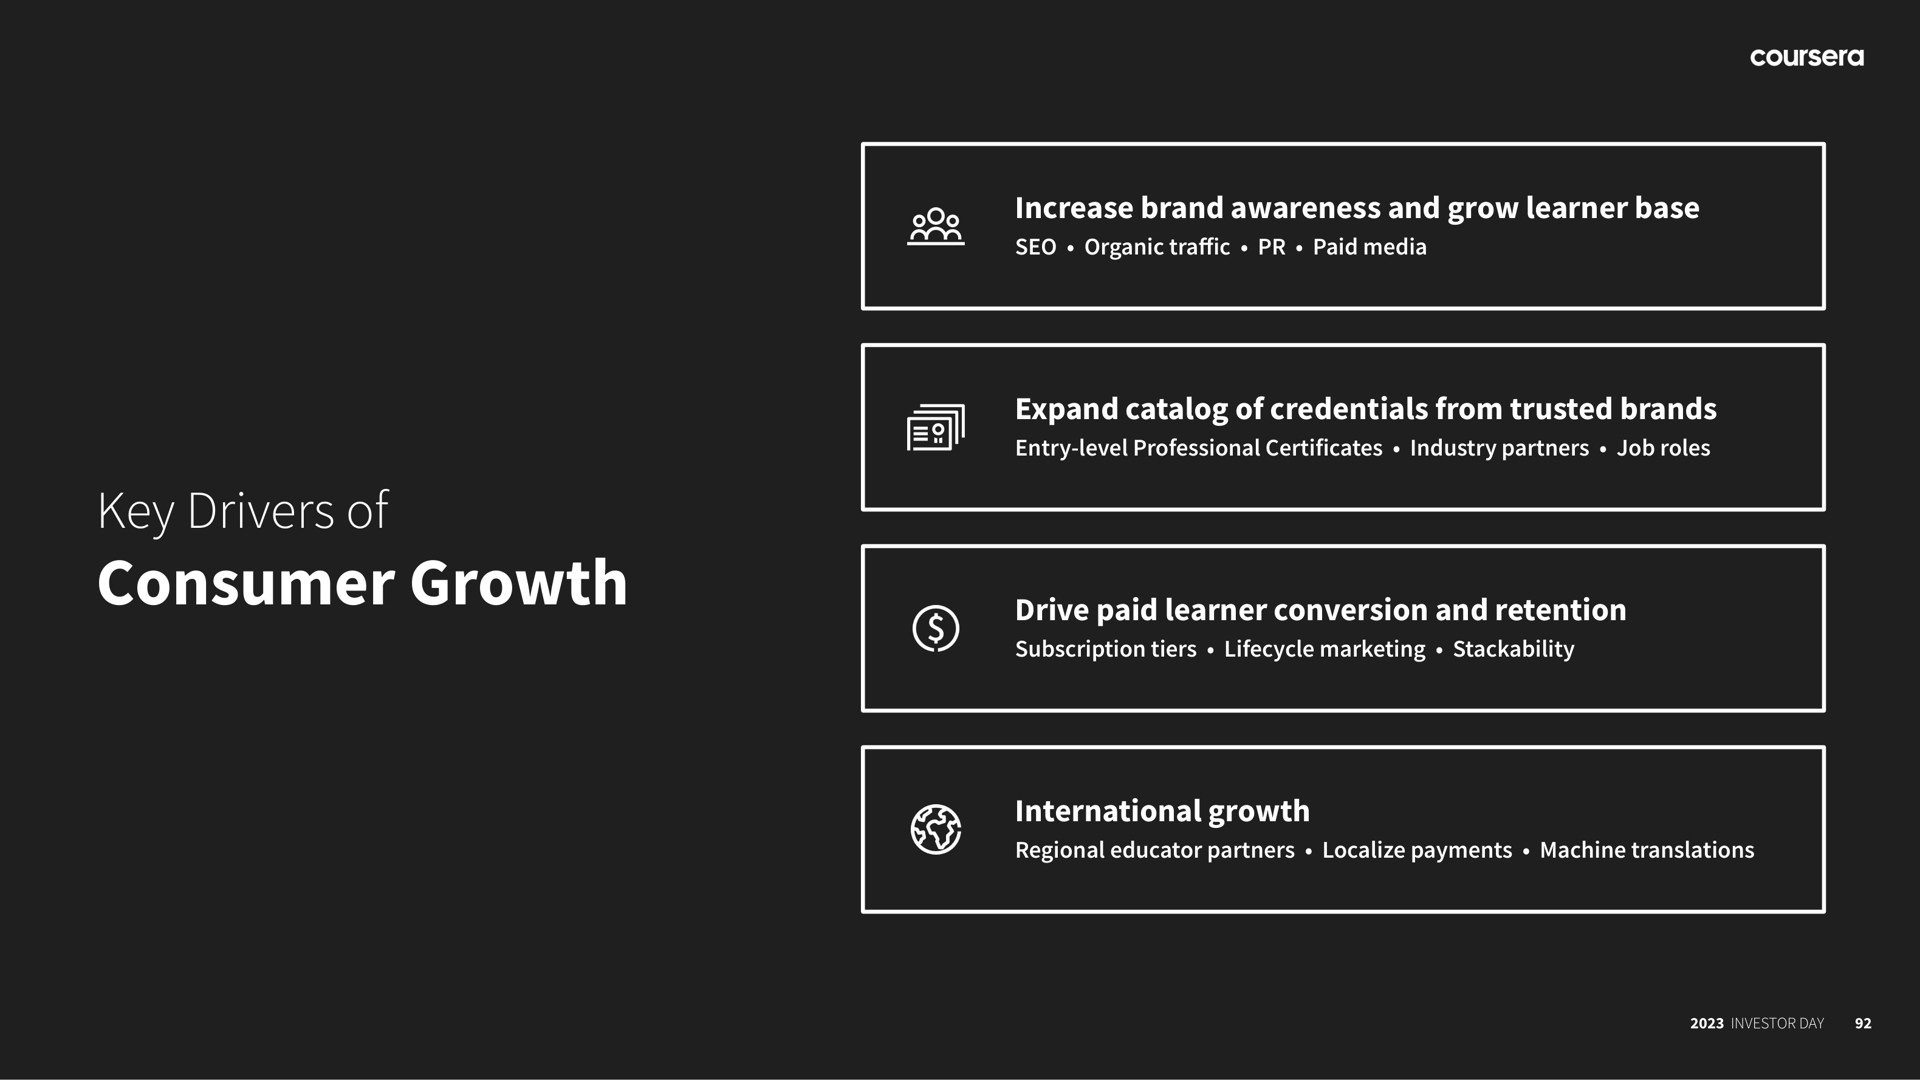 key drivers of consumer growth | Coursera